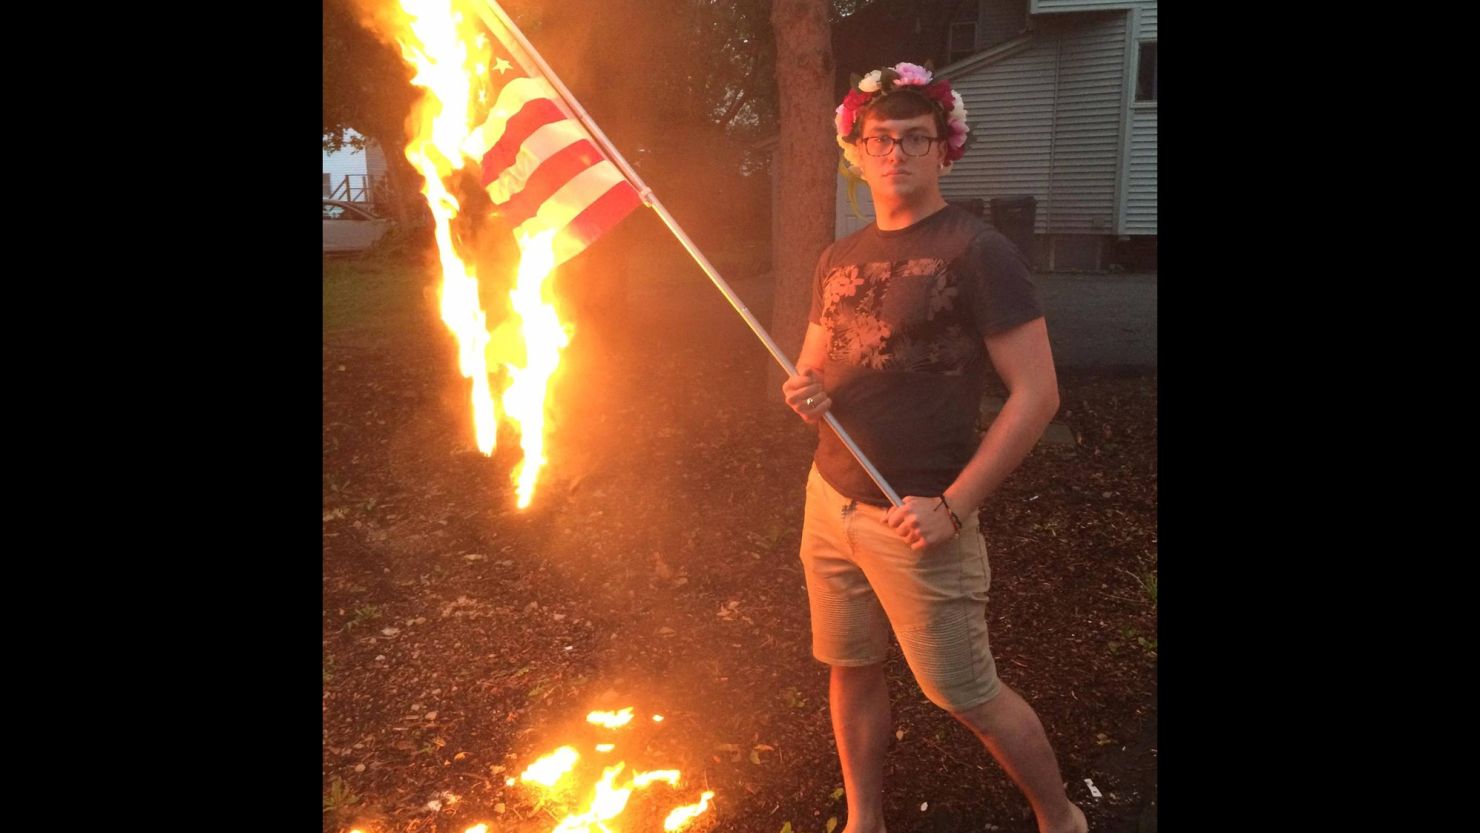 Bryton Mellott said on Facebook that he believes "blind nationalism is a corrosive thing."